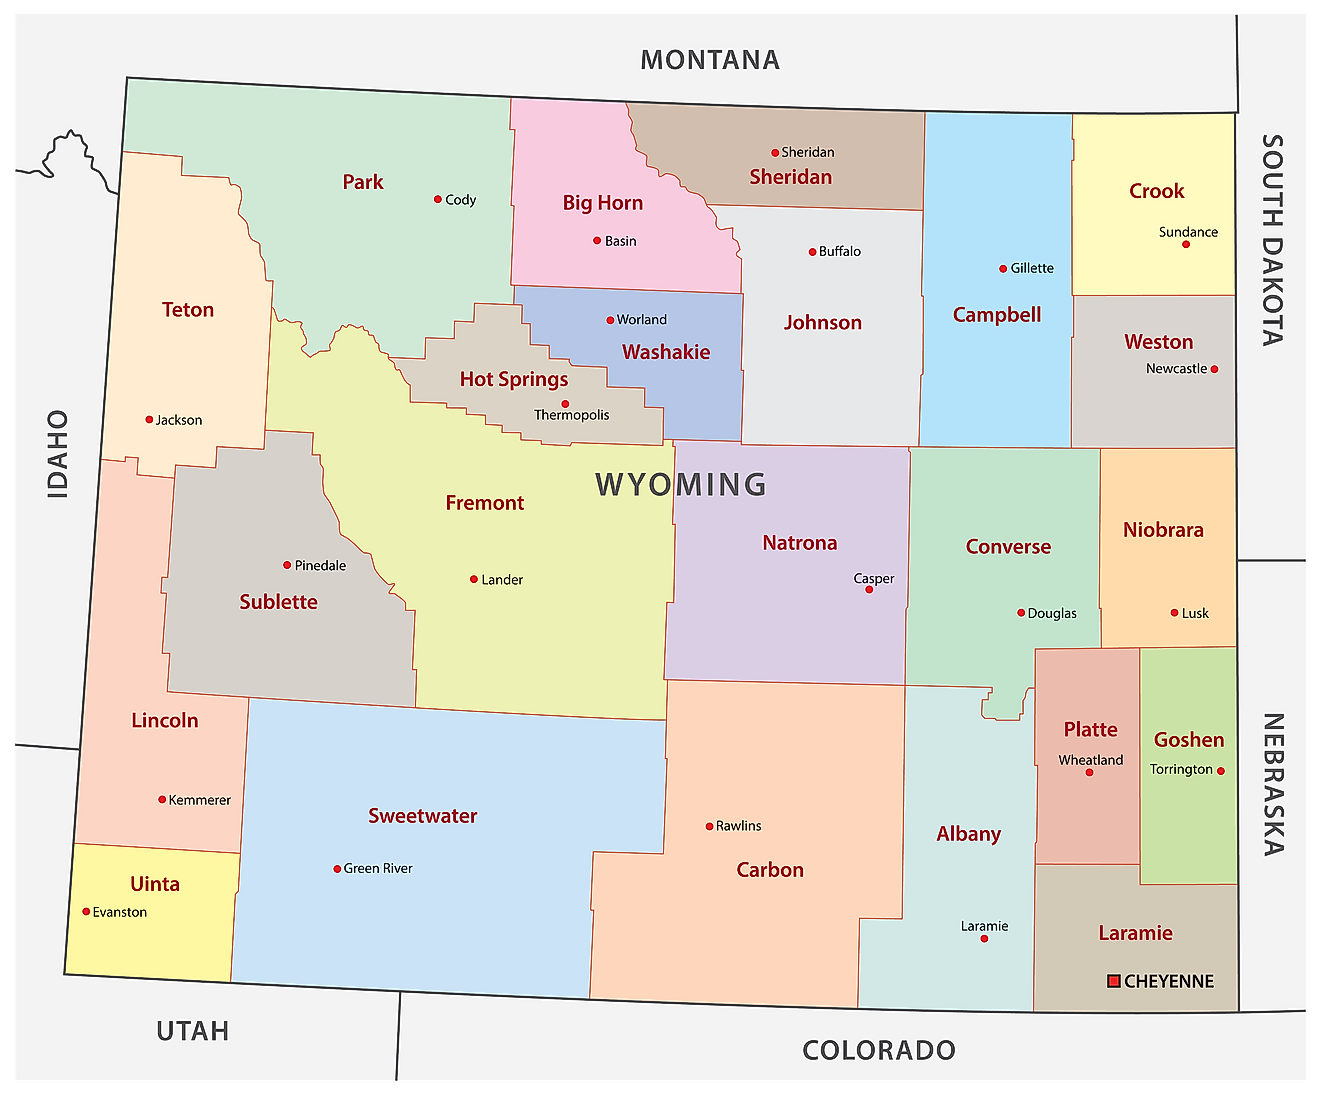 Administrative Map of Wyoming showing its 23 counties and the capital city - Cheyenne